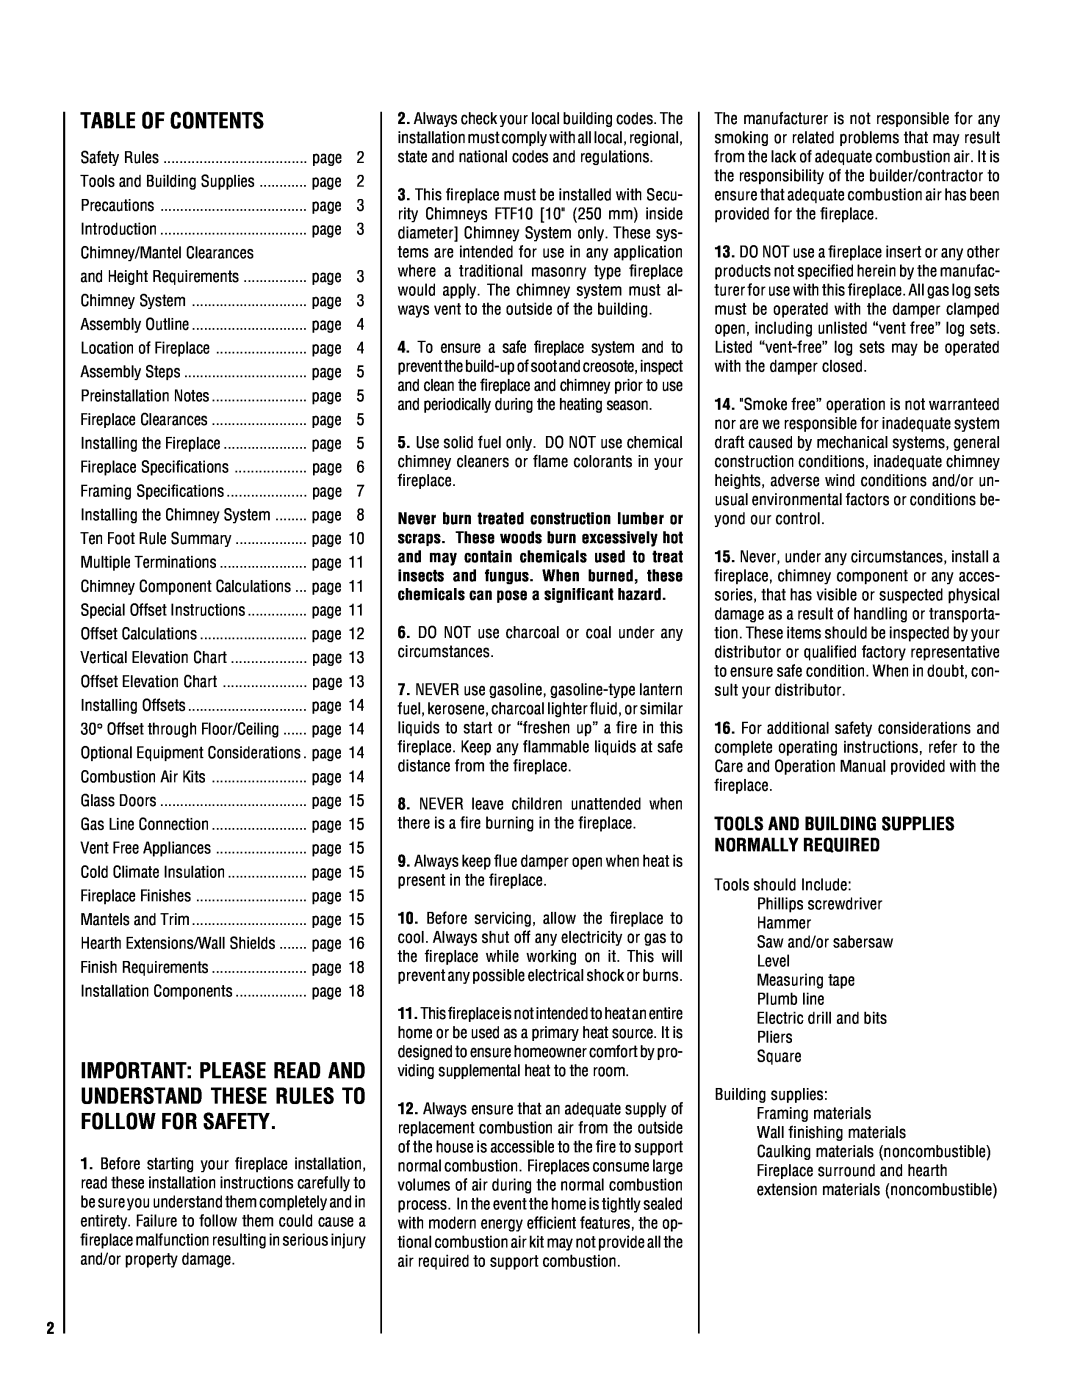 Lucent Technologies TM-4500 installation instructions Table Of Contents, Tools And Building Supplies Normally Required 